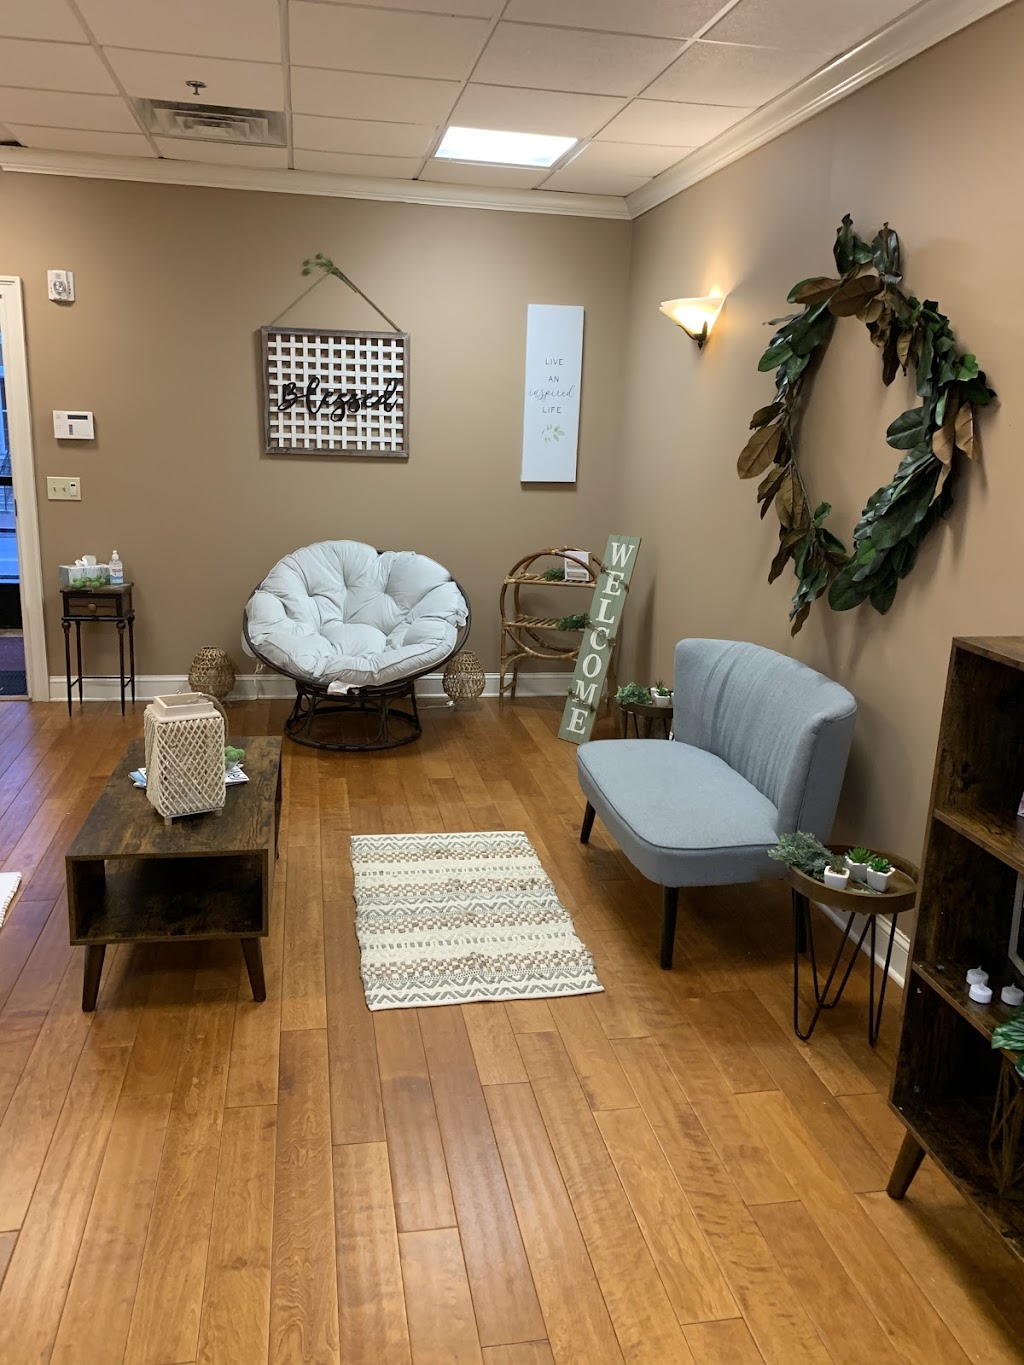 Nature’s Touch Therapeutic Massage and Wellness Spa | 130 W 4th St, Bethlehem, PA 18015 | Phone: (484) 951-2605